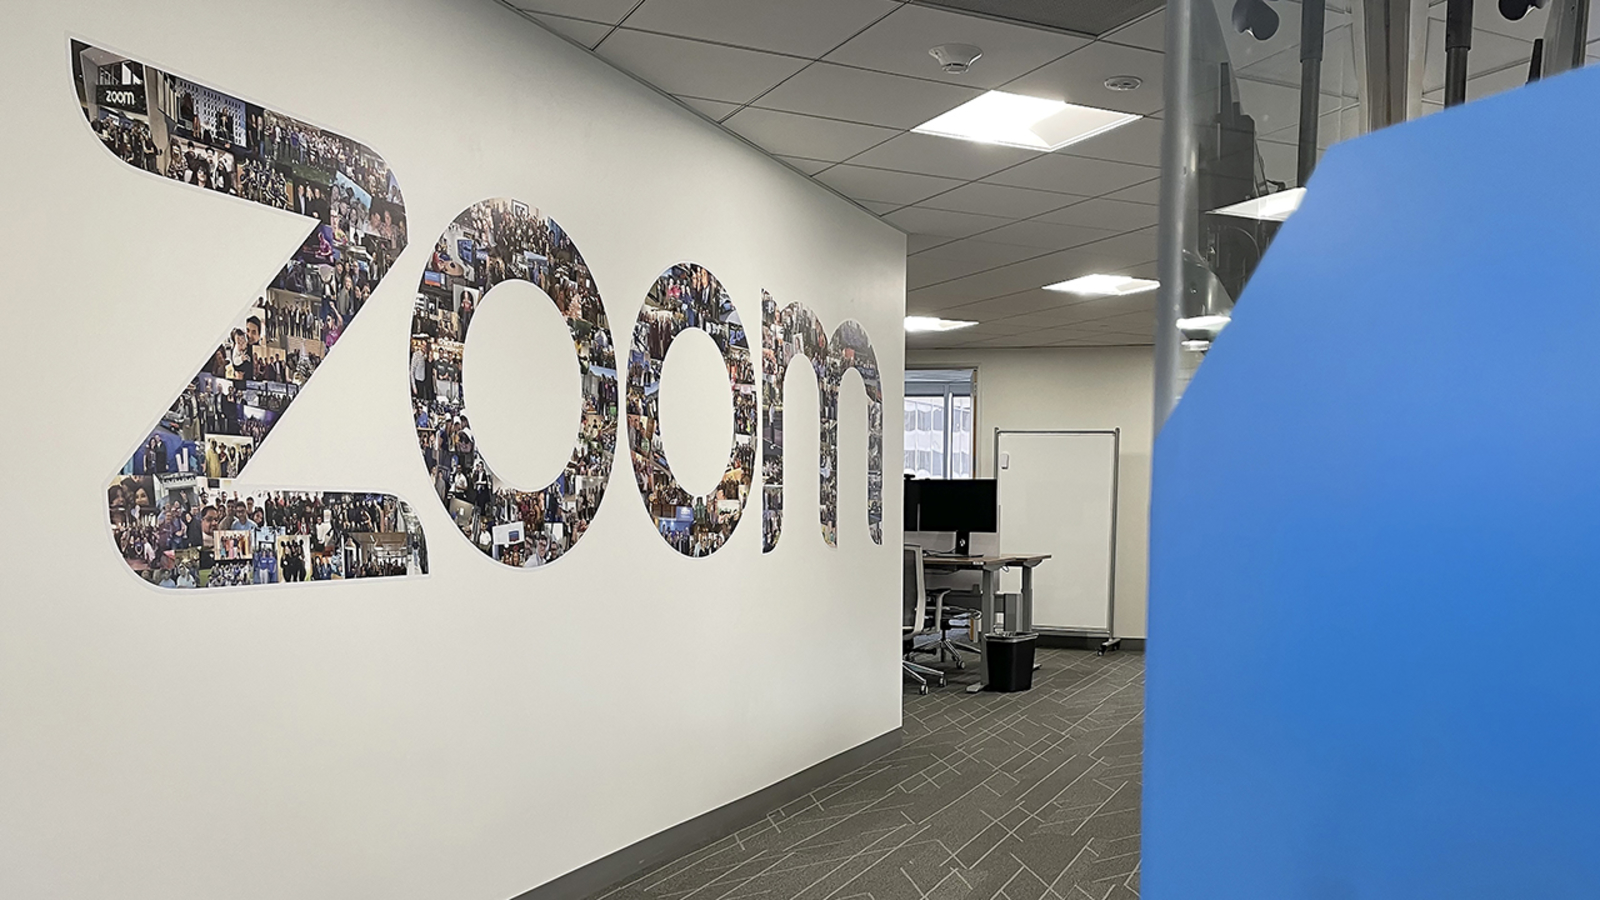 Zoom, key player in remote work revolution, orders some employees back to office